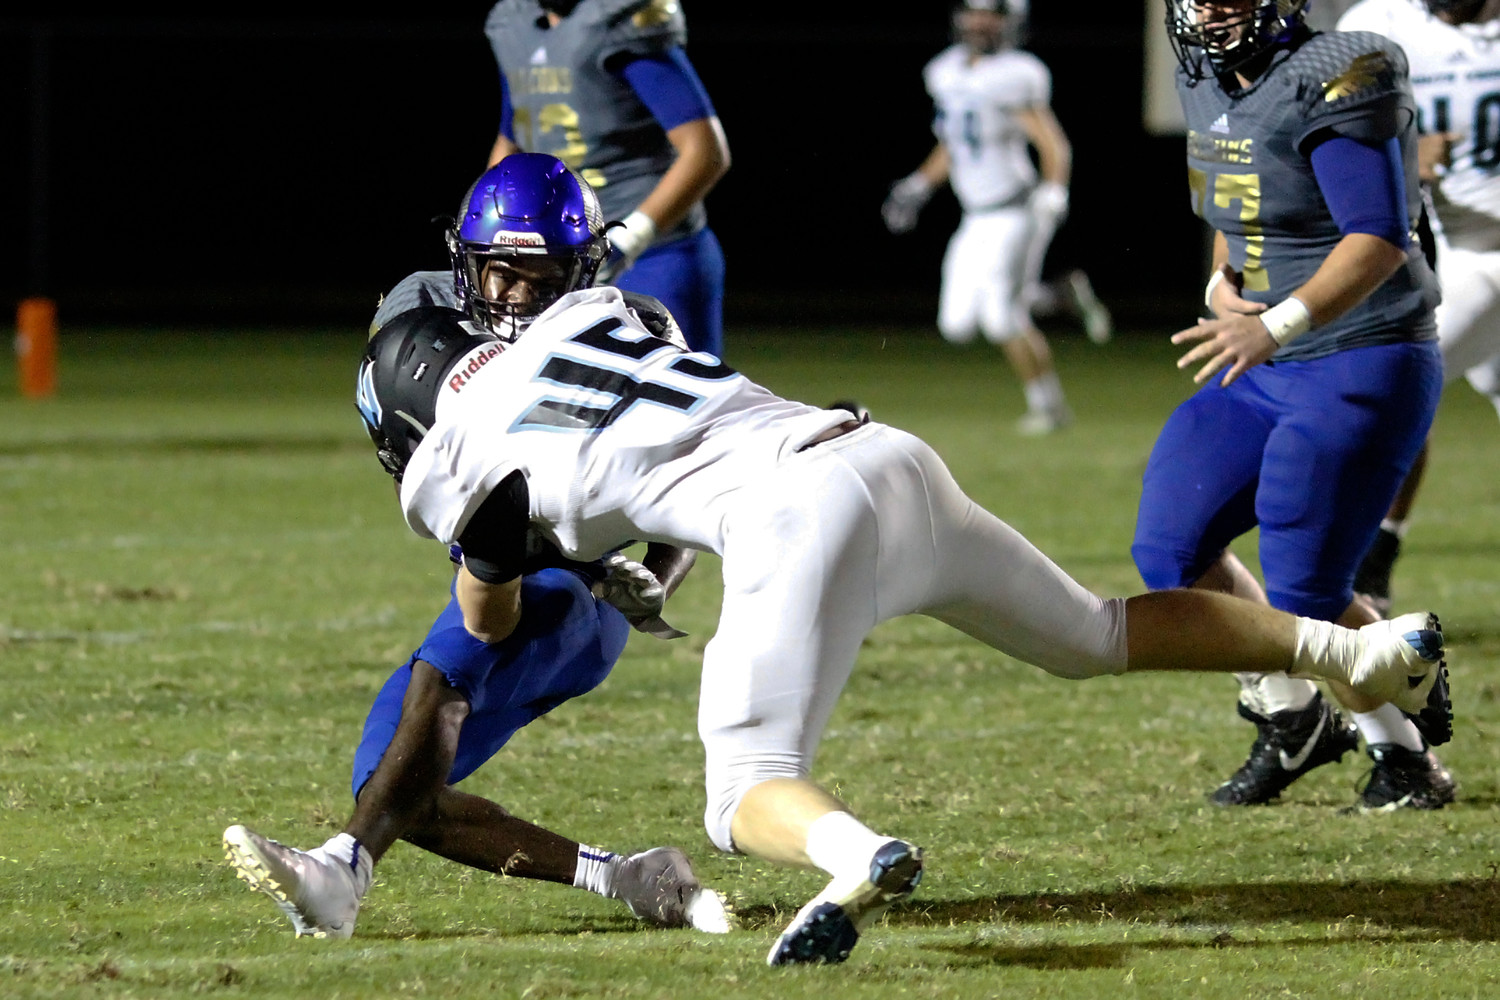 CD James of Ponte Vedra fights off a stiff arm to the face.